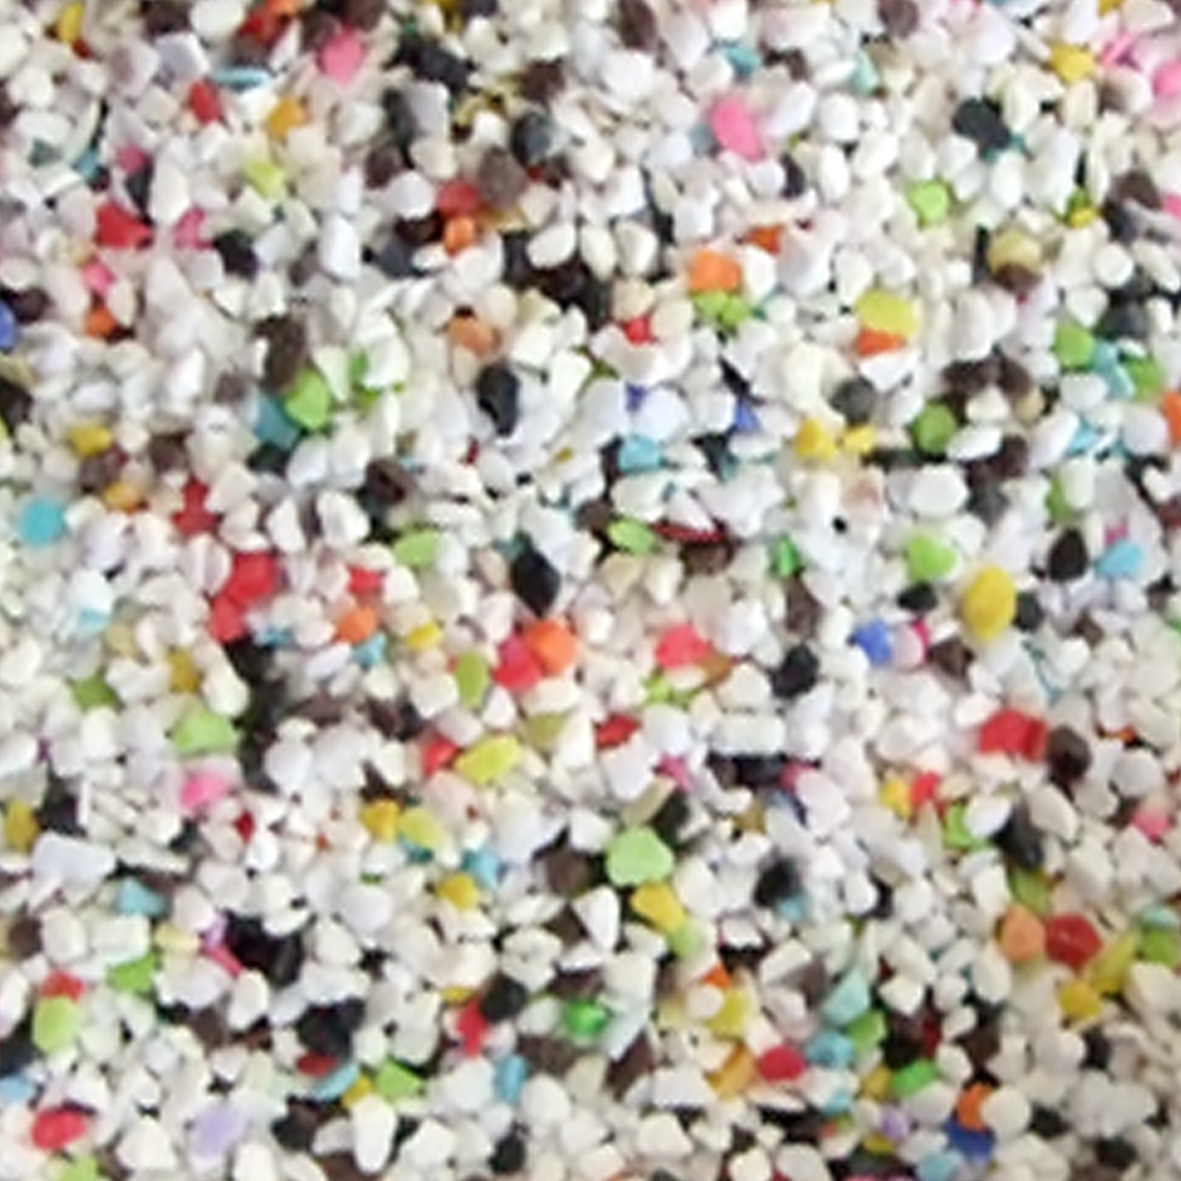 Small circular stones or pebbles. The majority of them are white but there is also a mix of black, red, pink, blue, green, yellow and orange.